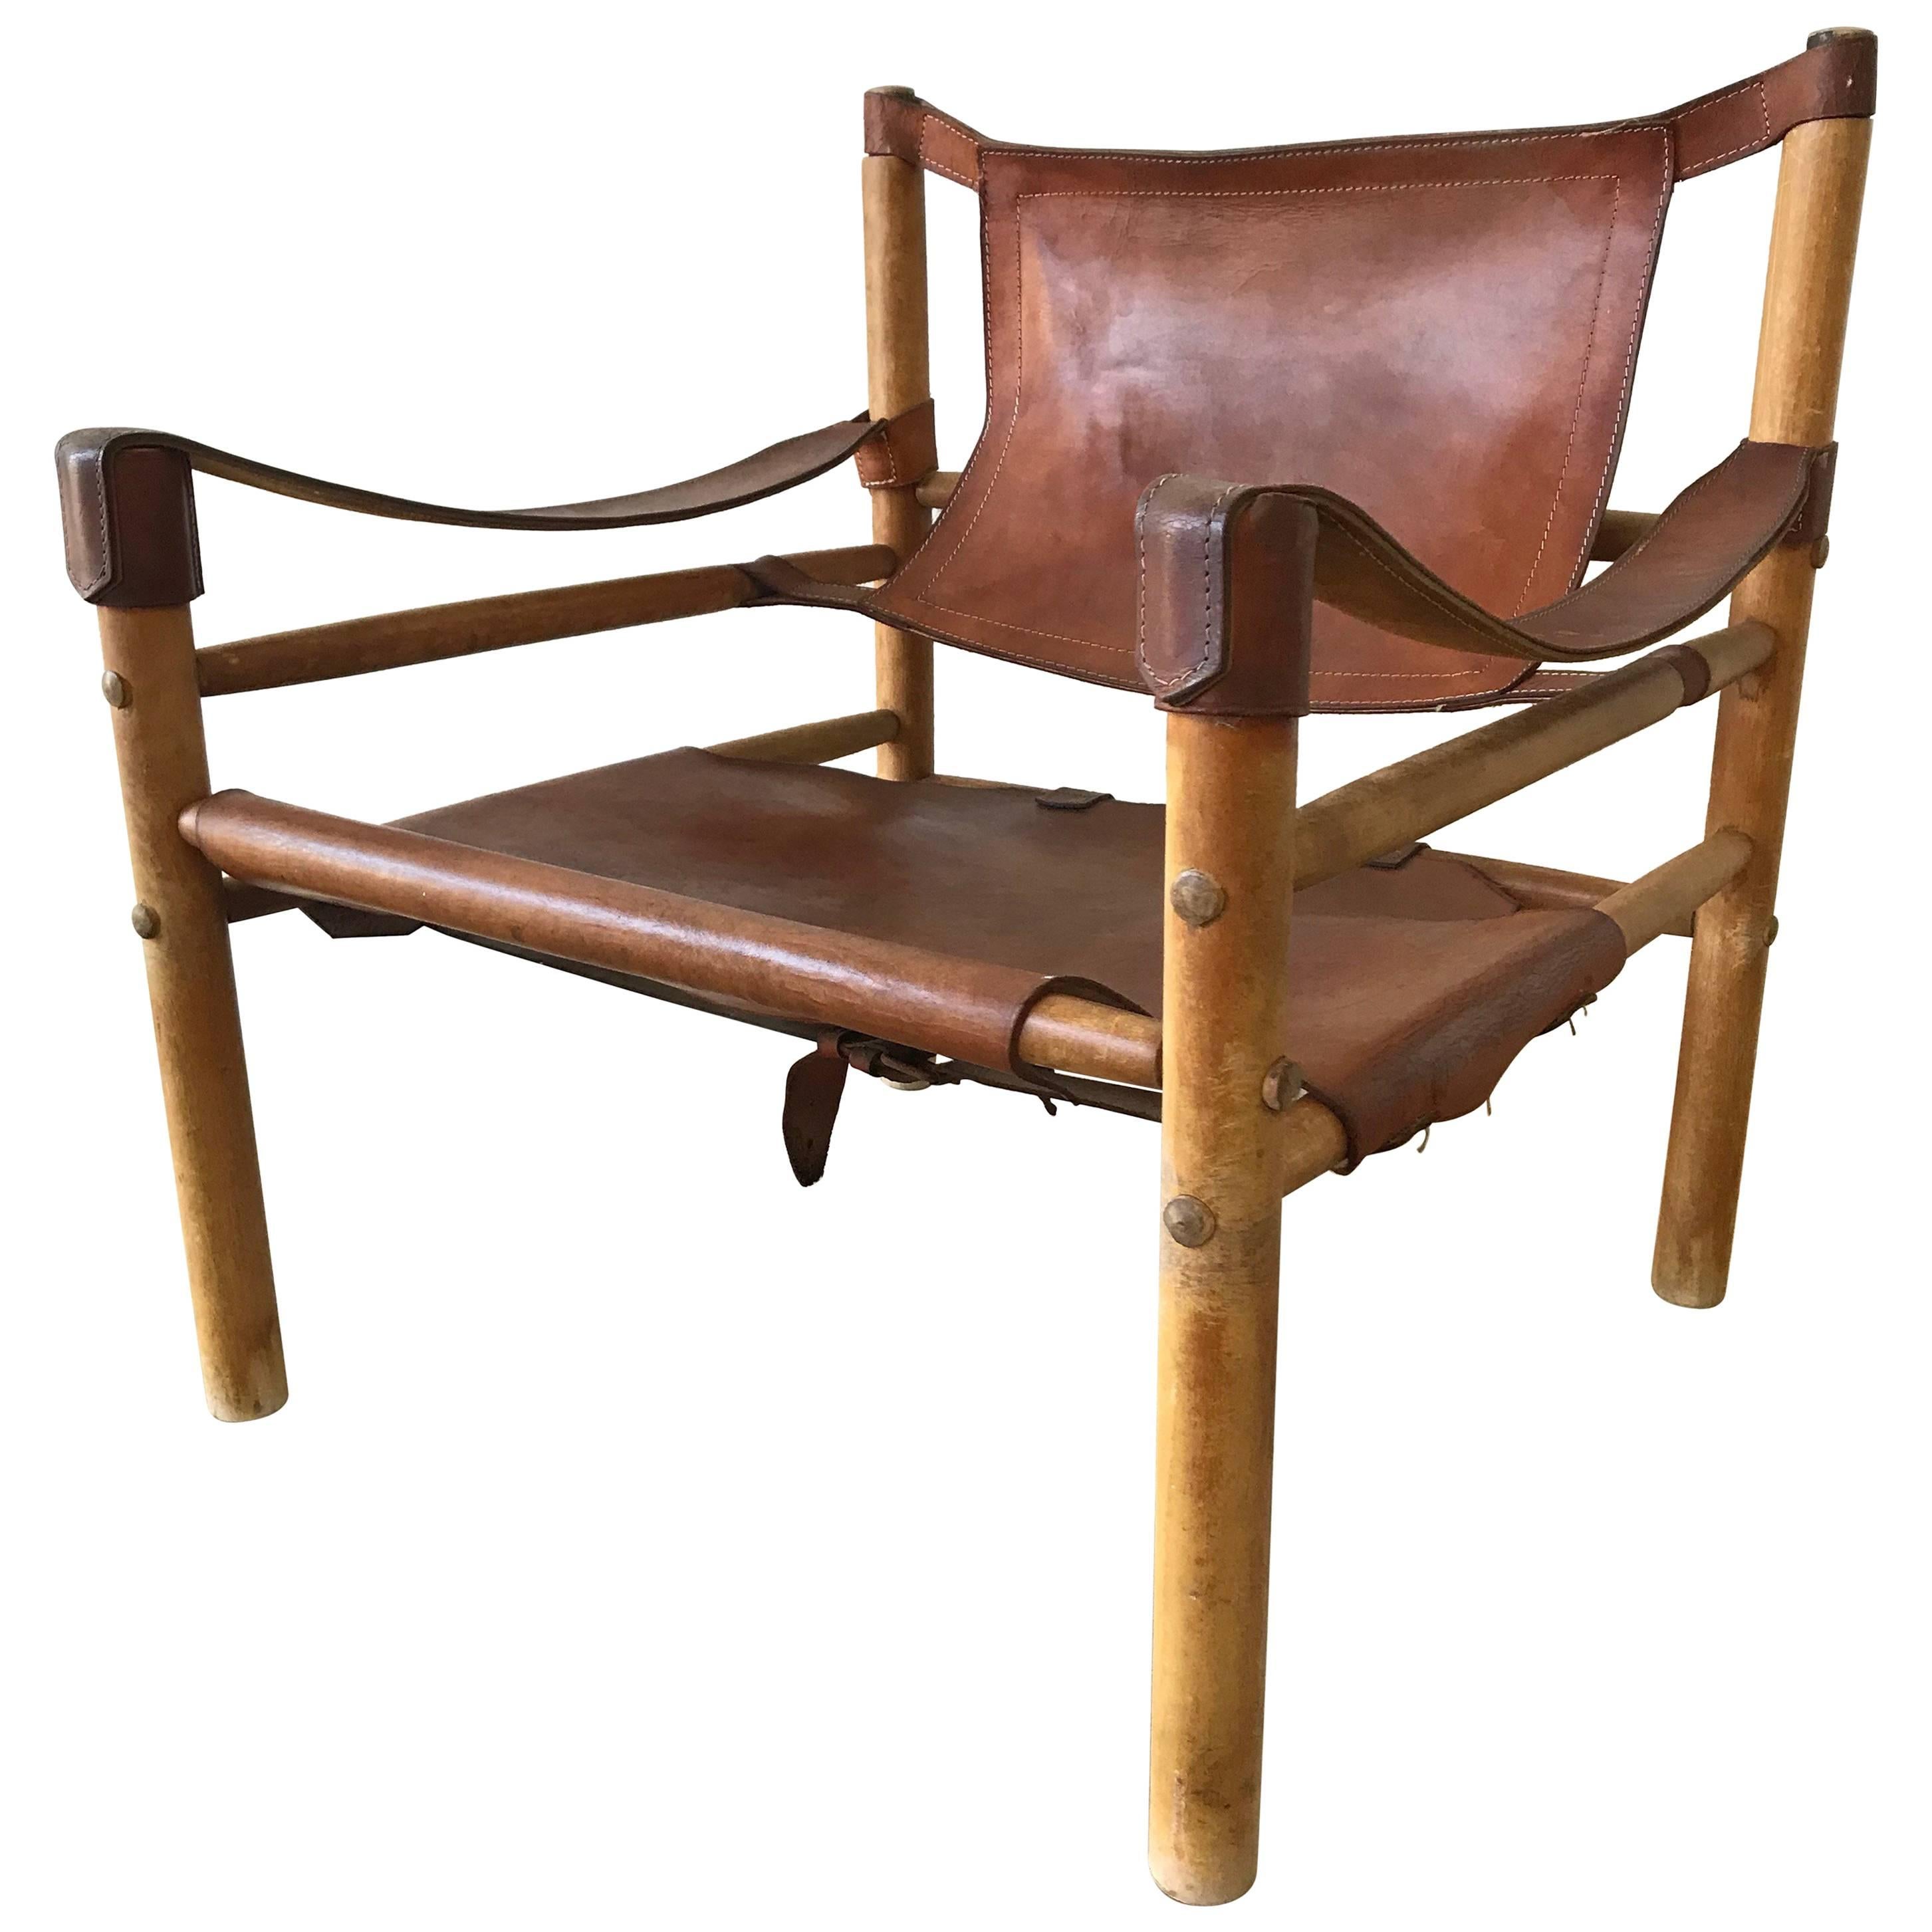 Early Distressed Saddle Leather "Sirocco" Safari Chair by Arne Norell